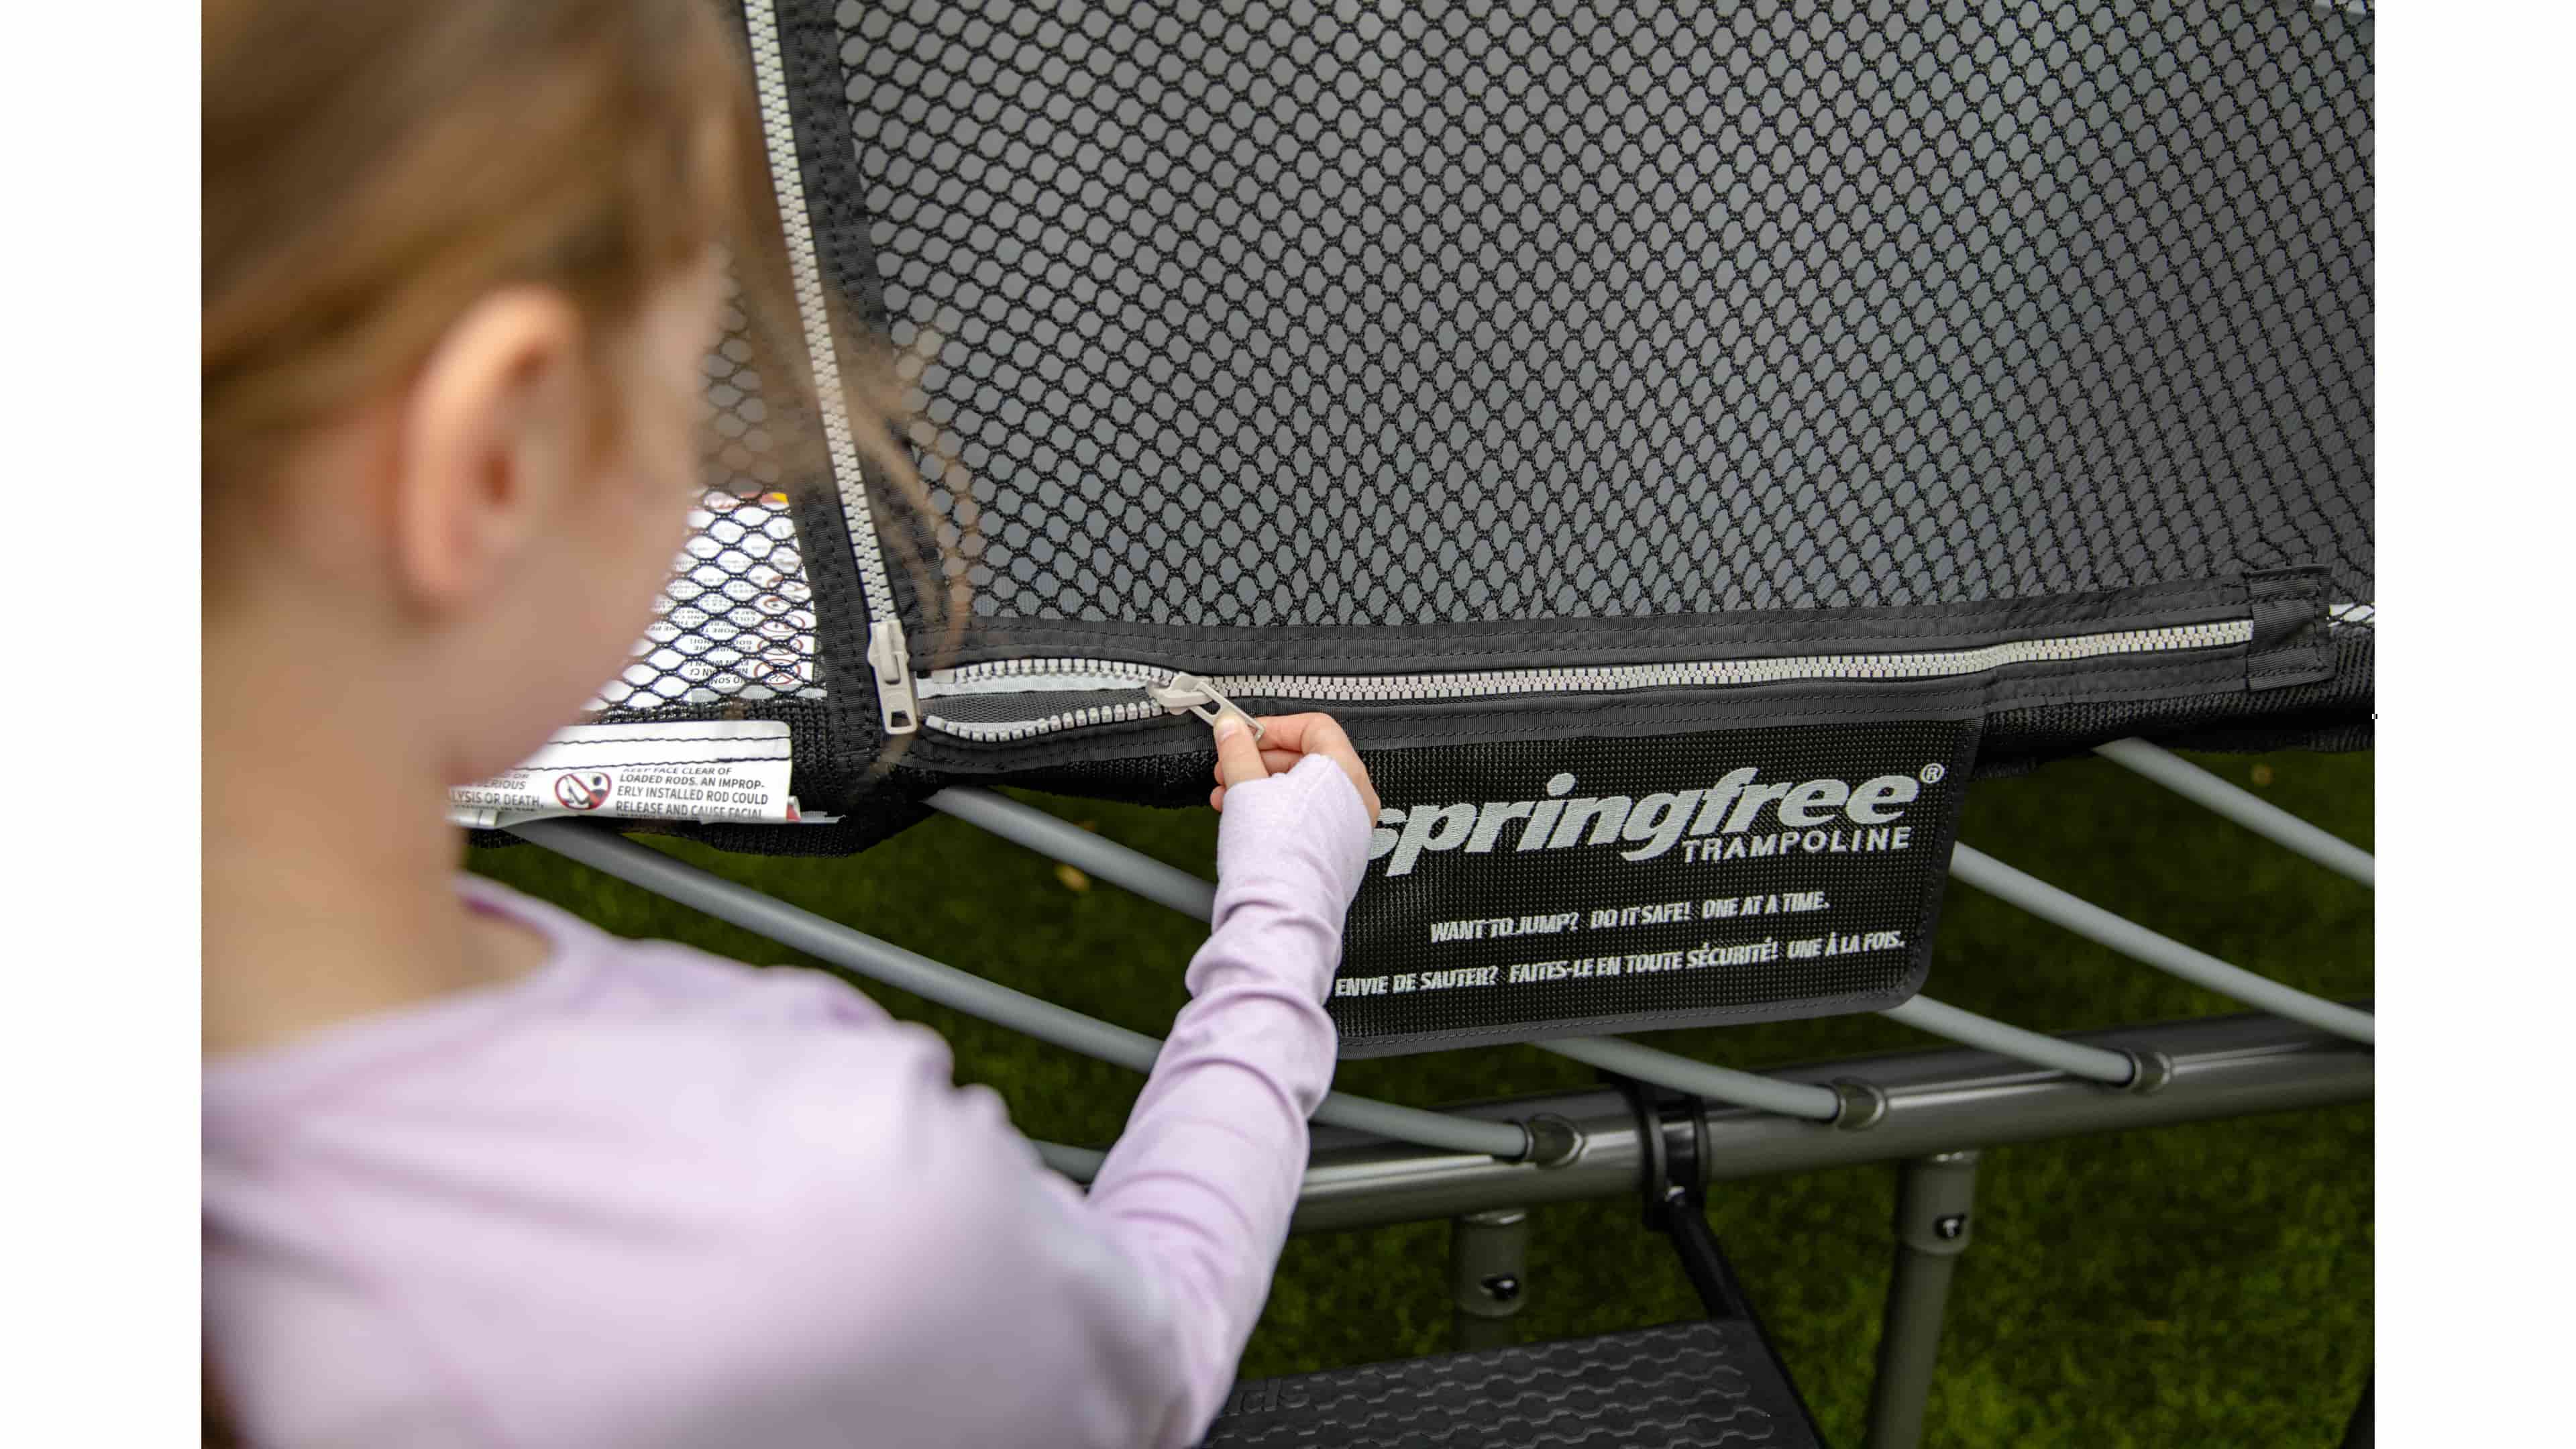 How to Find the Springfree Trampoline Serial Number (IMPORTANT)